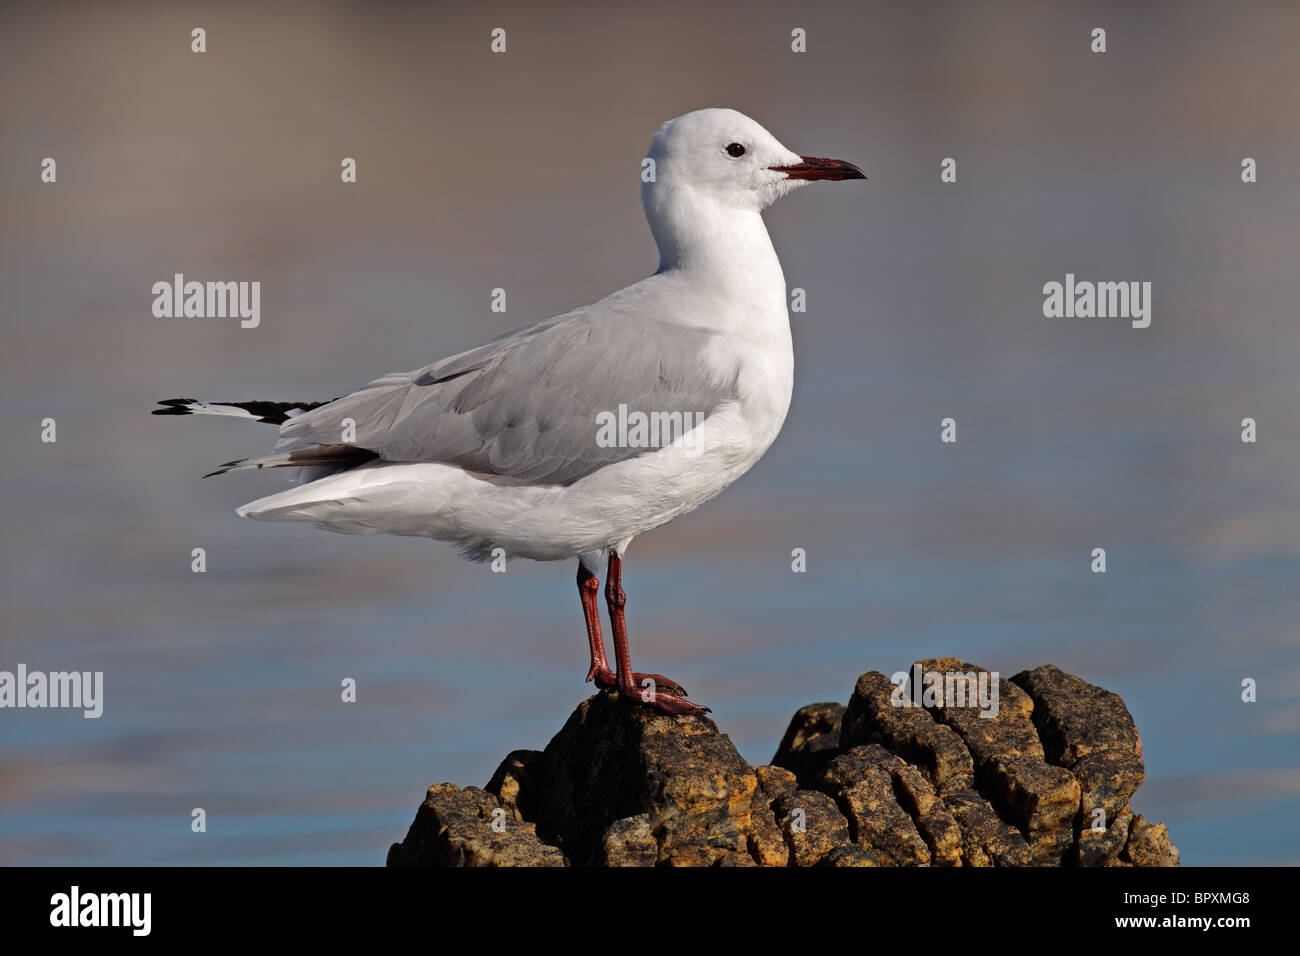 A Hartlaubs gull (Larus hartlaubii) perched on a rock, South Africa Stock Photo